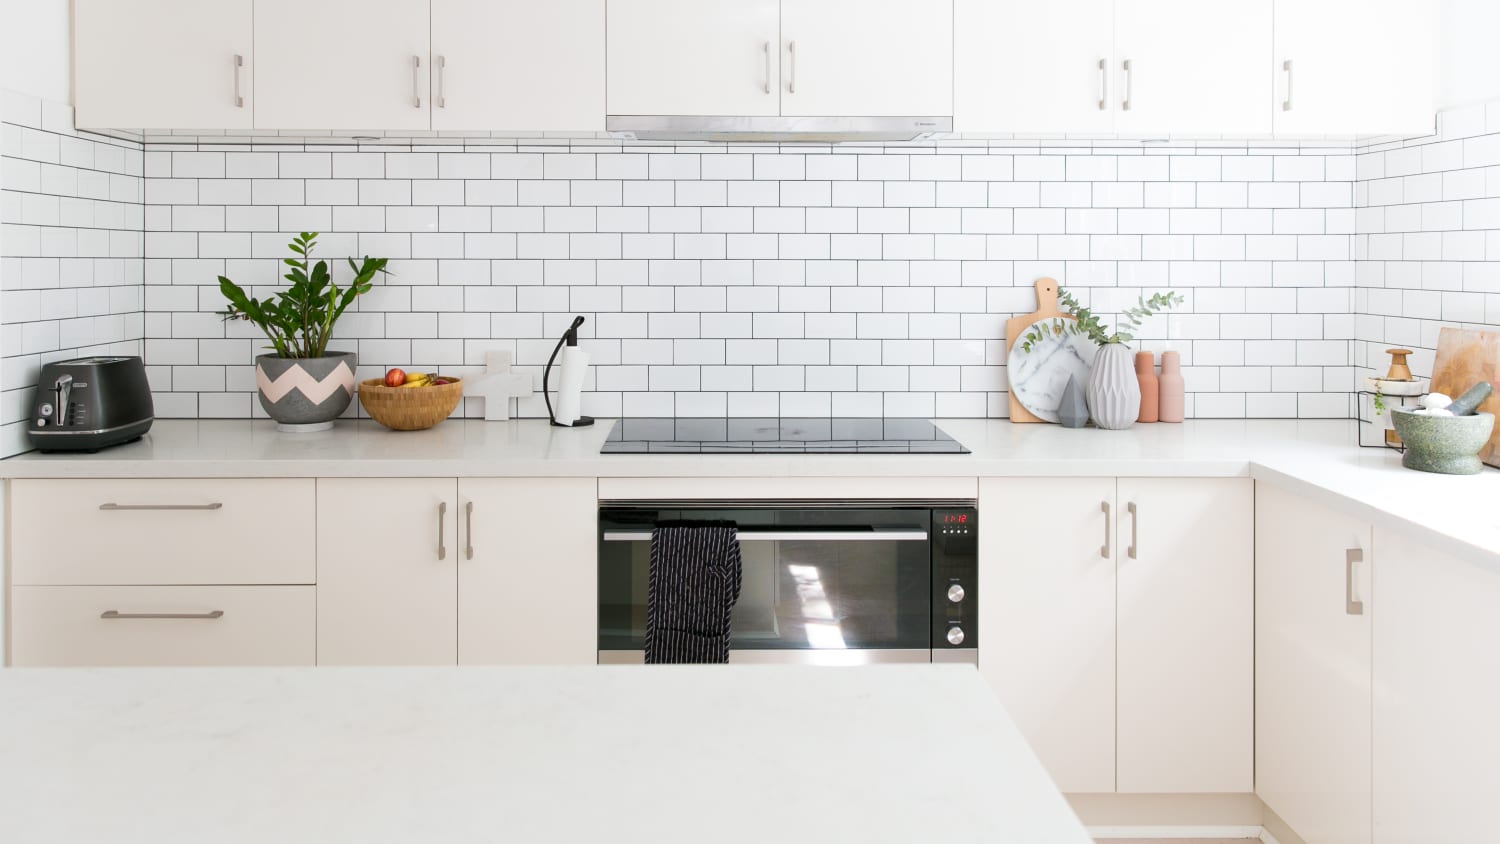 10 Things You Should Take Off Your Kitchen Countertops to